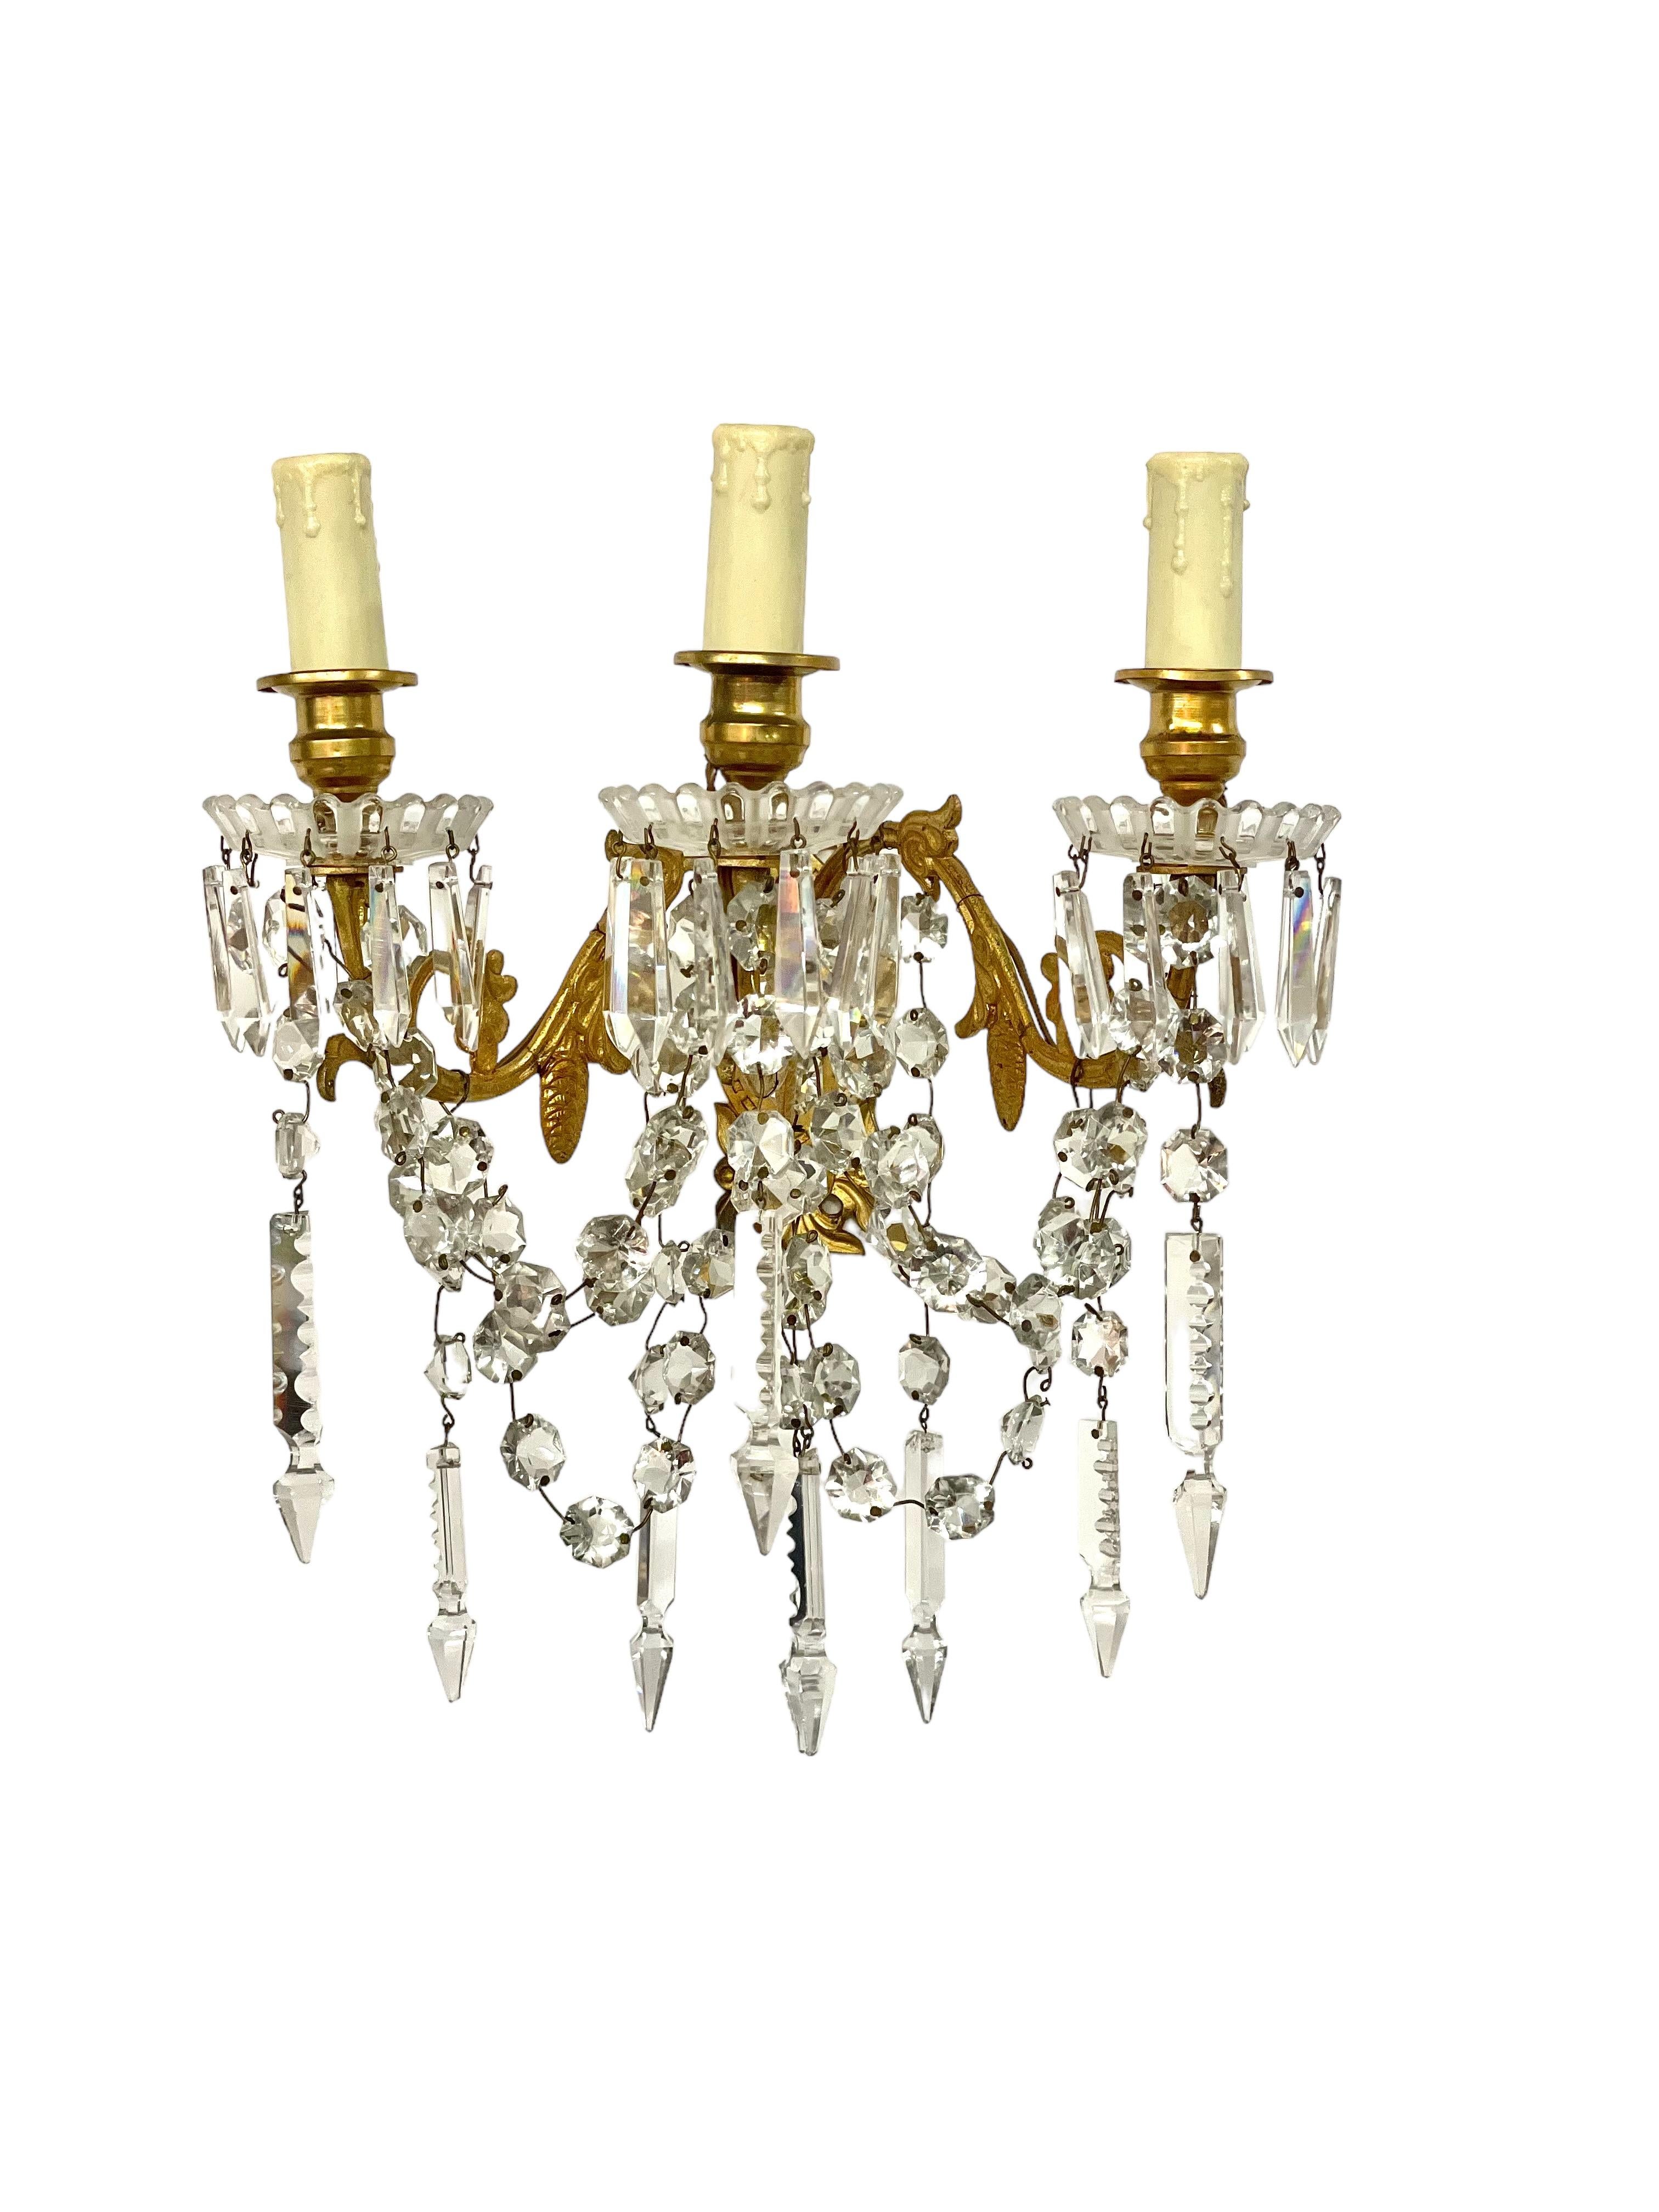 A truly gorgeous pair of glittering three-armed sconces, made by renowned crystal manufacturer Baccarat in the 19th century. These fabulous wall lights are crafted from gilt bronze, and are dripping with intricately cut crystal pendants and